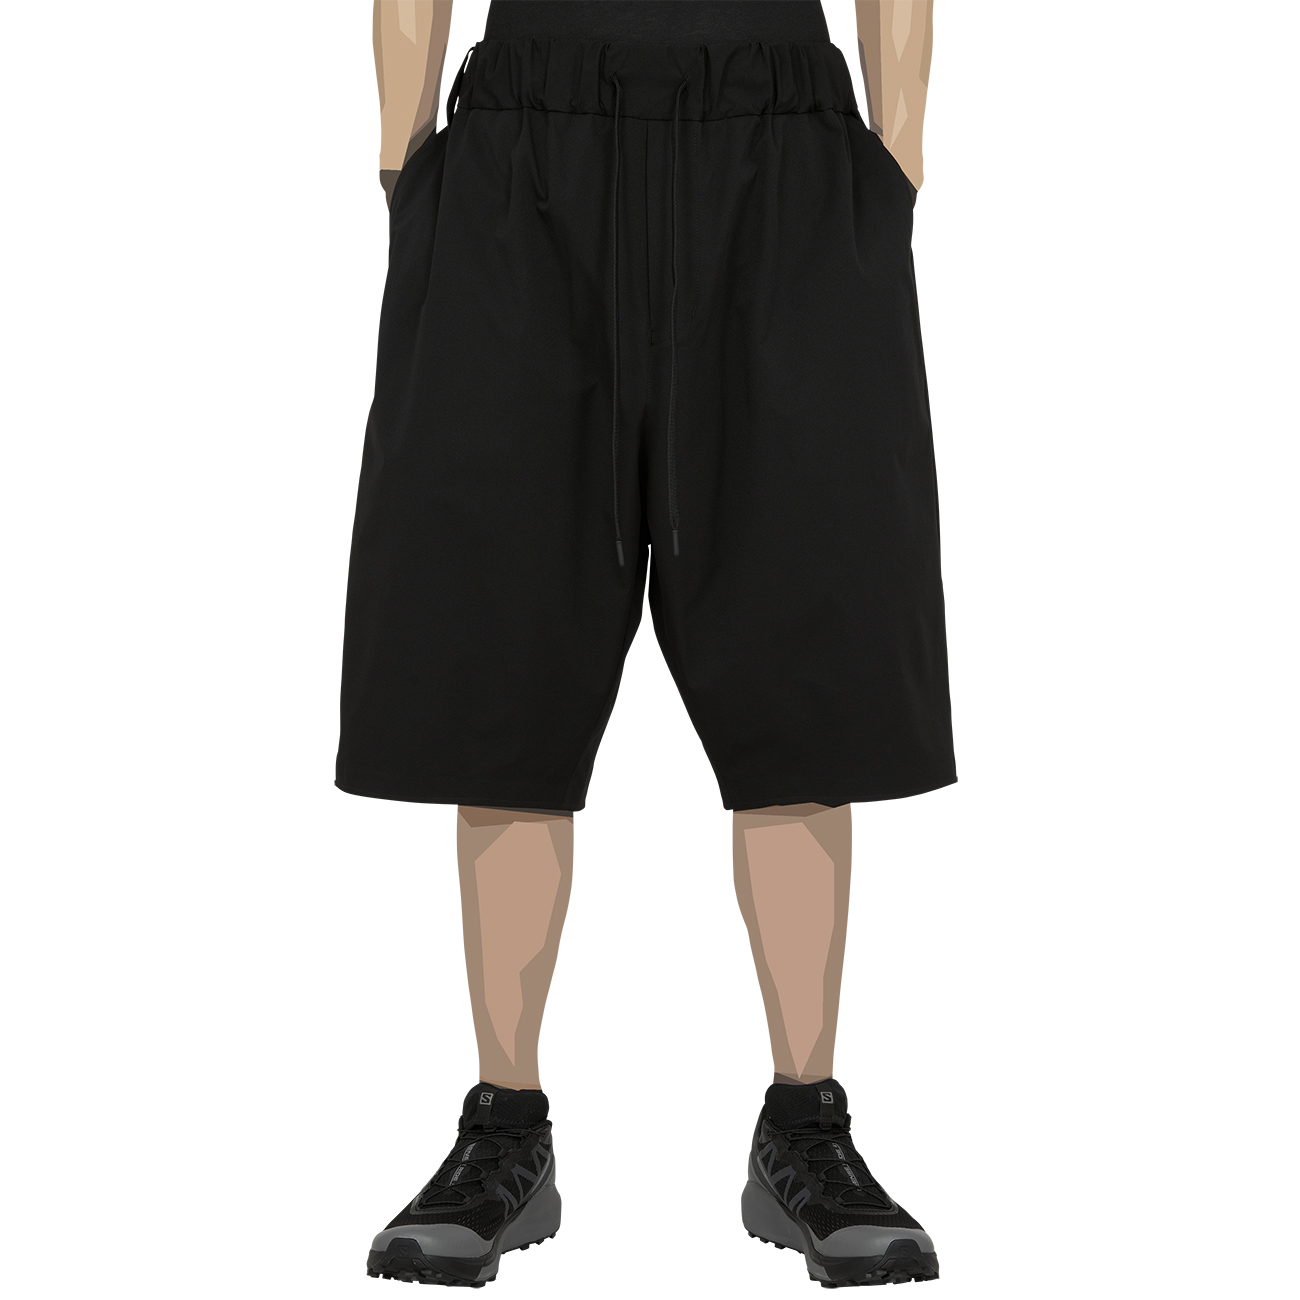 WHITE MOUNTAINEERING BLK (ホワイトマウンテニアリング ビーエルケー) - 22AW STRETCHED SARROUEL SHORTS BLACKの詳細画像3